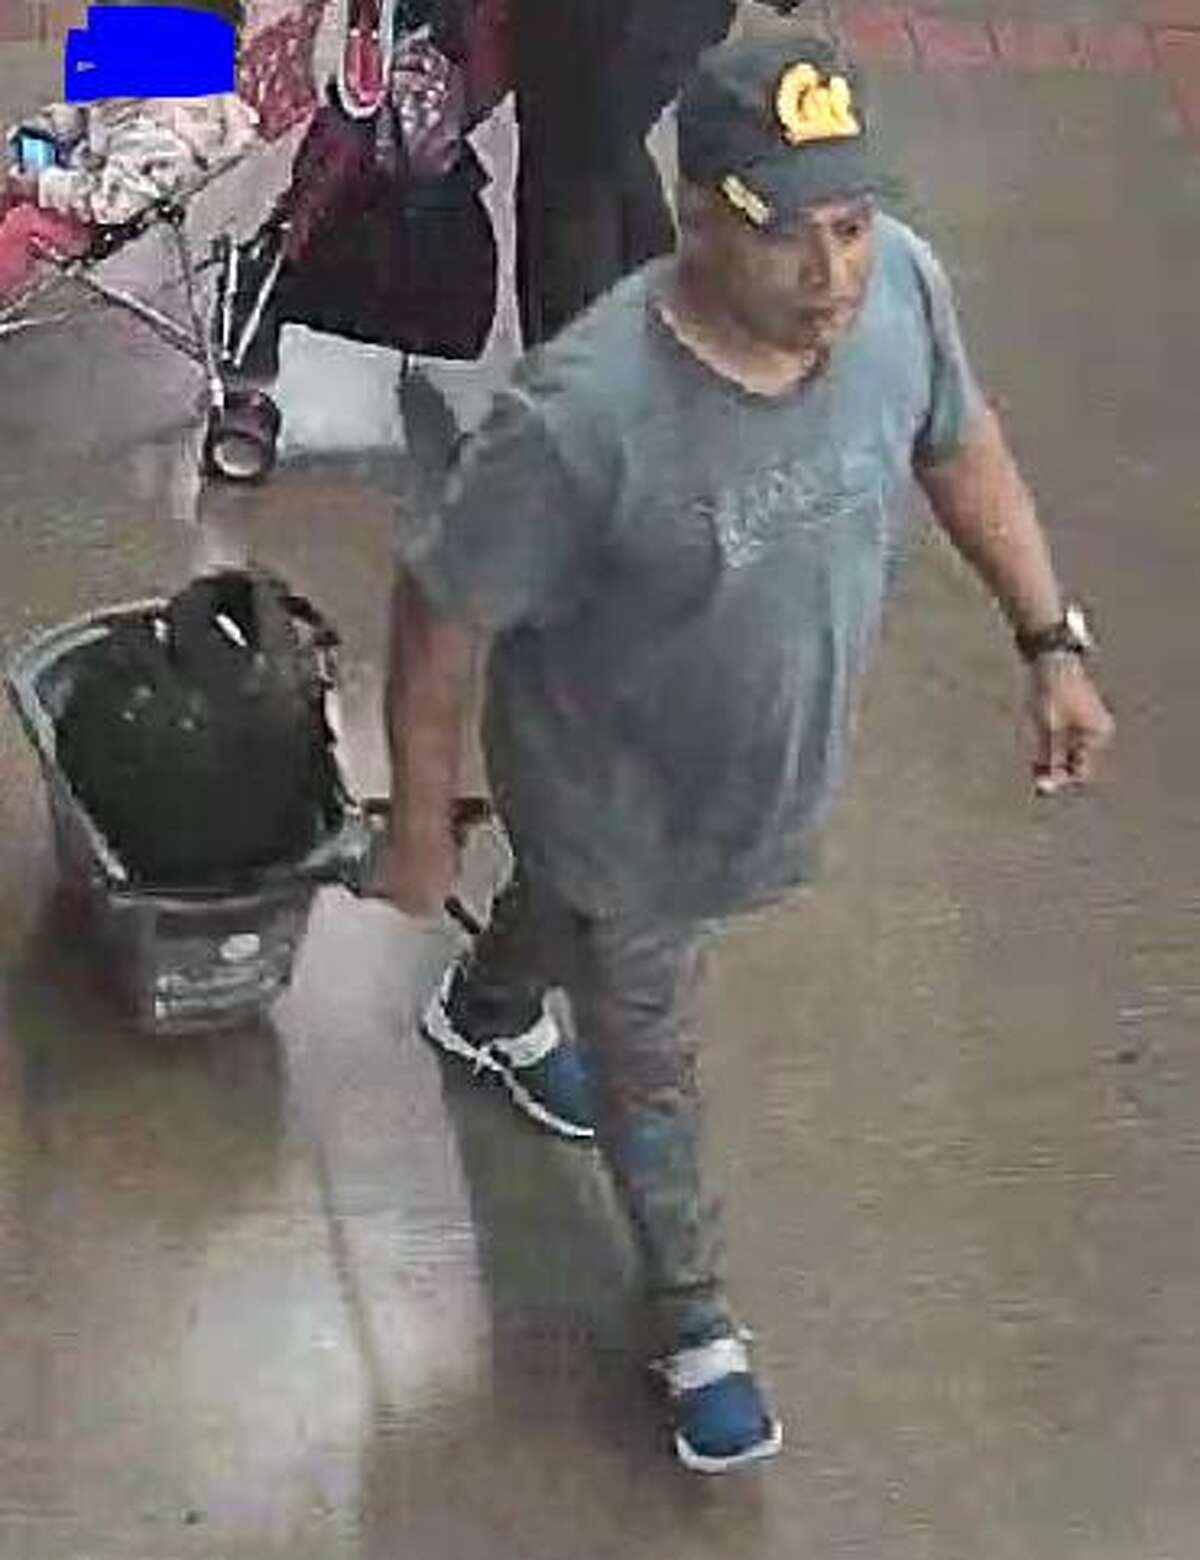 BART Police are asking for the public’s help in identifying this man, a person of interest in a stabbing at the MacArthur Station in Oakland on Saturday August 26, 2018.